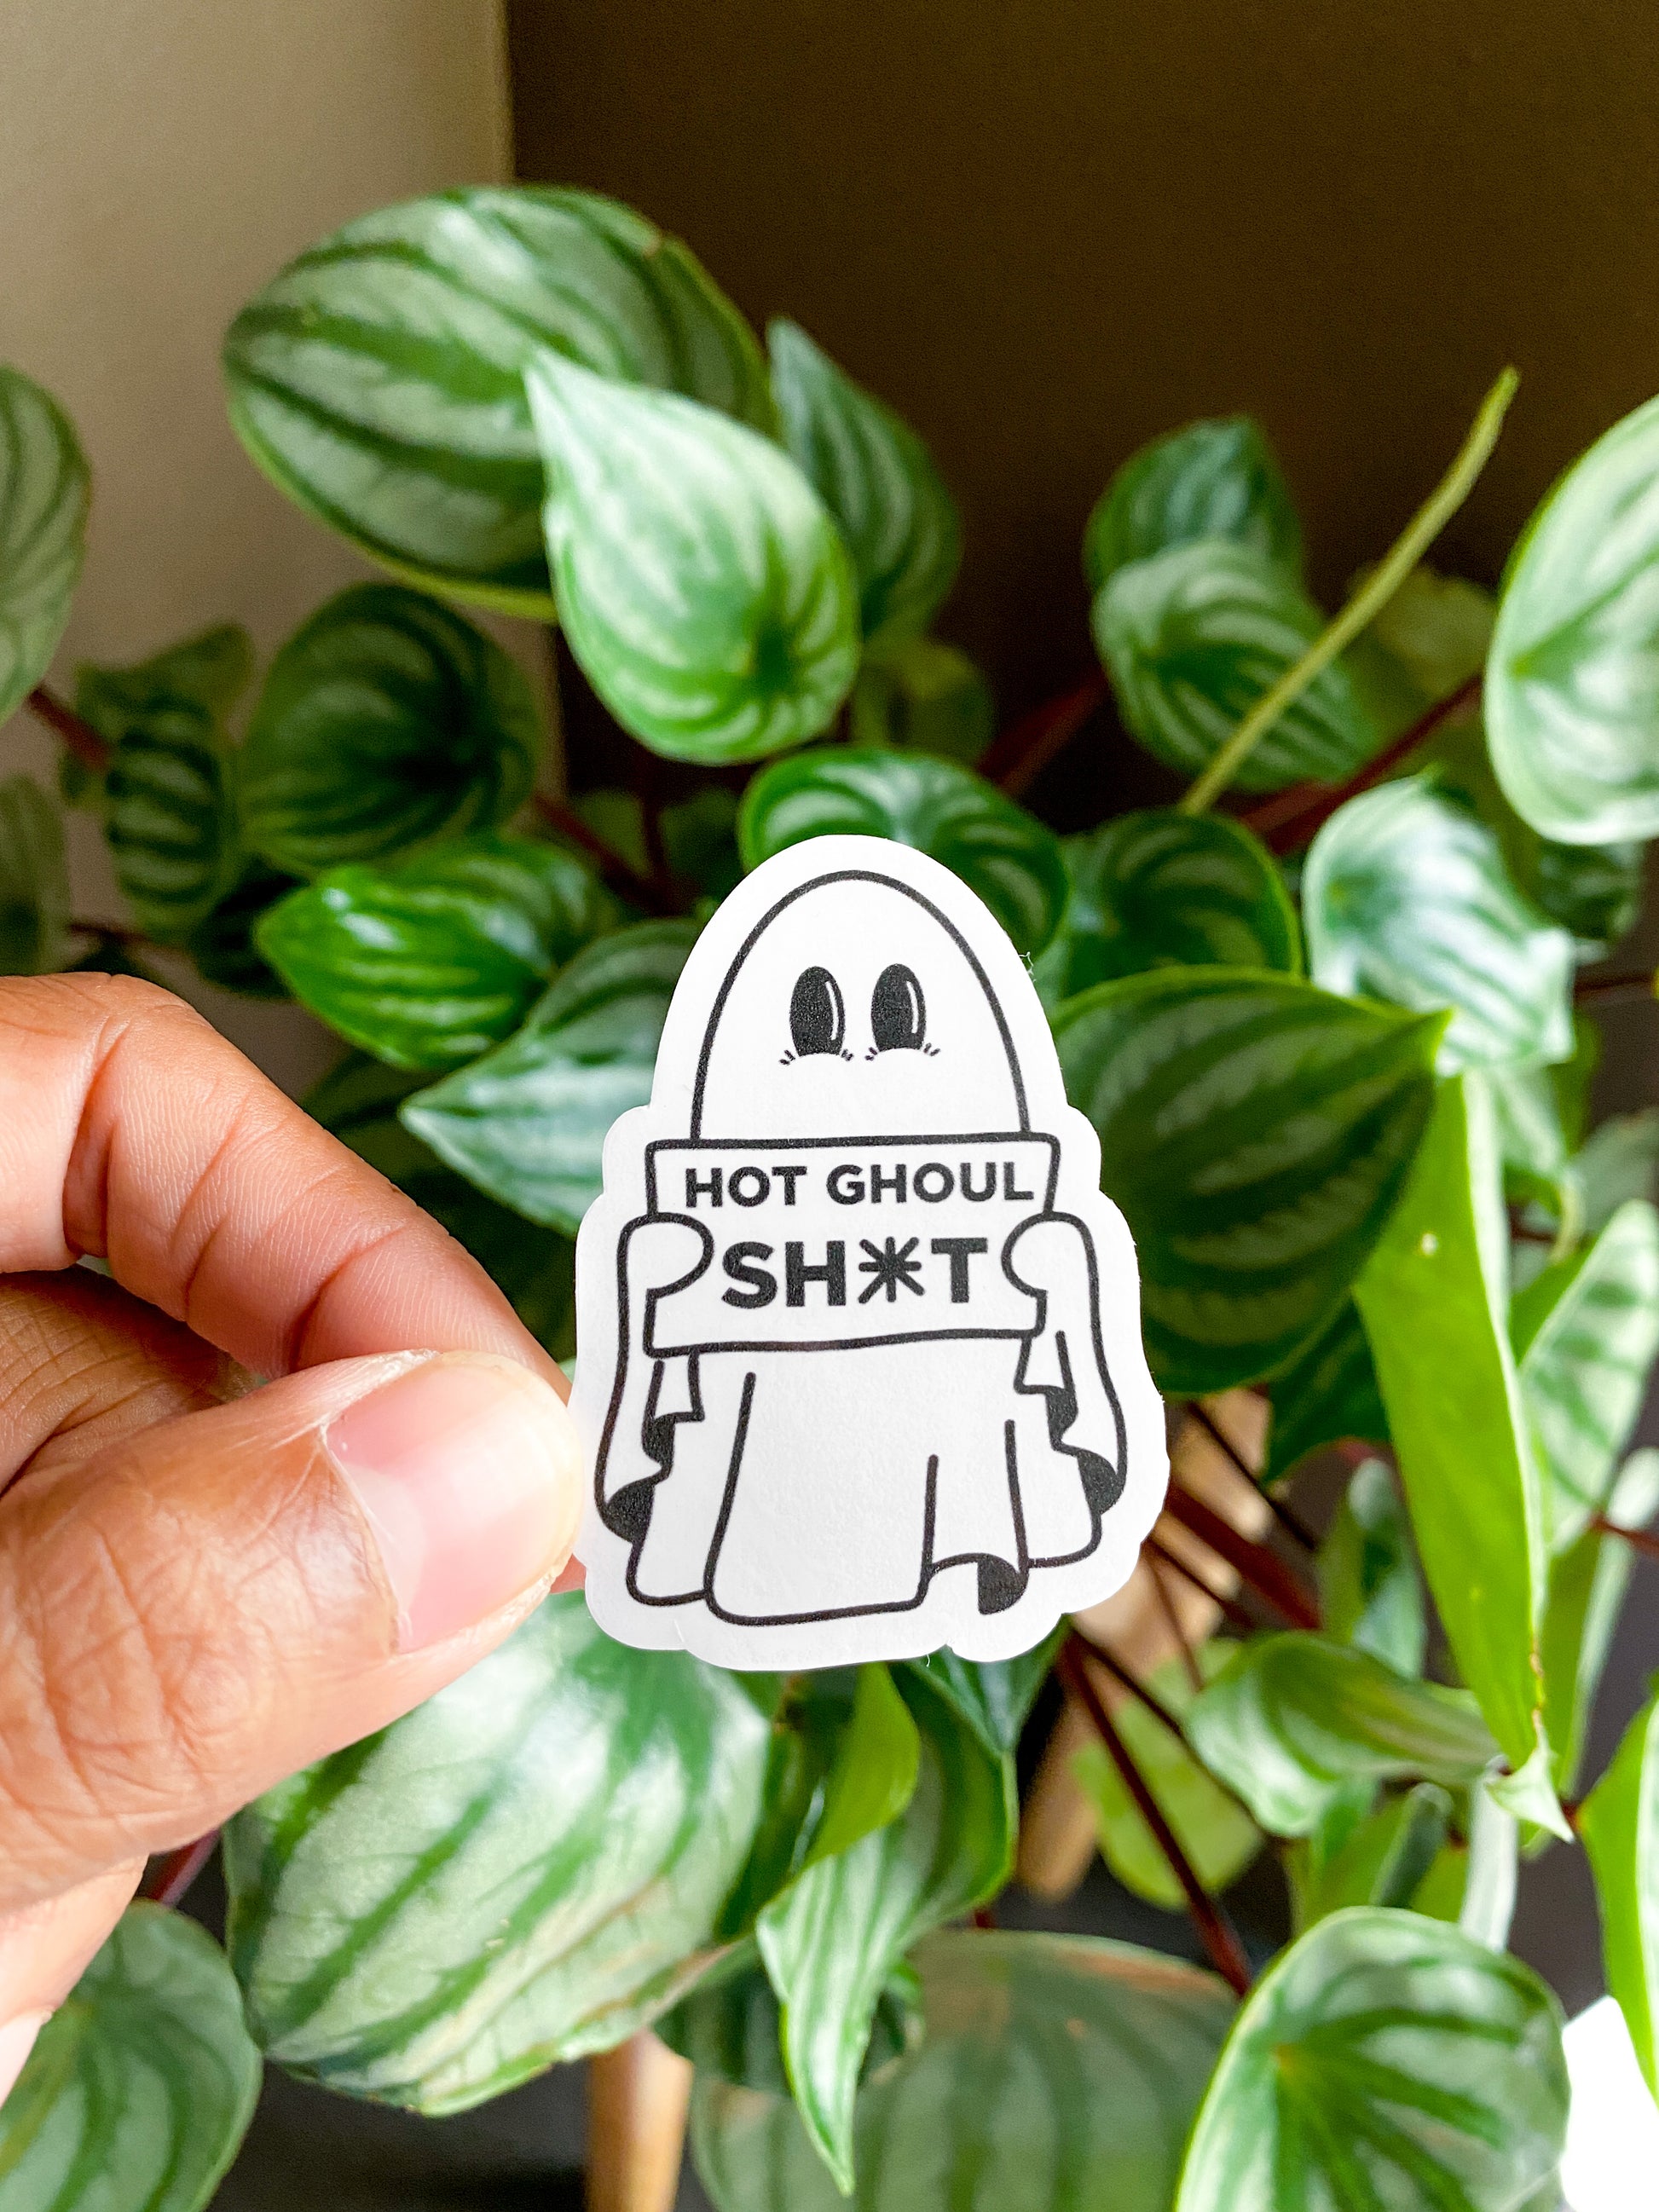 Single Hot Ghoul sticker of little ghost with big eyes holding sign that reads "hot ghoul sh*t"